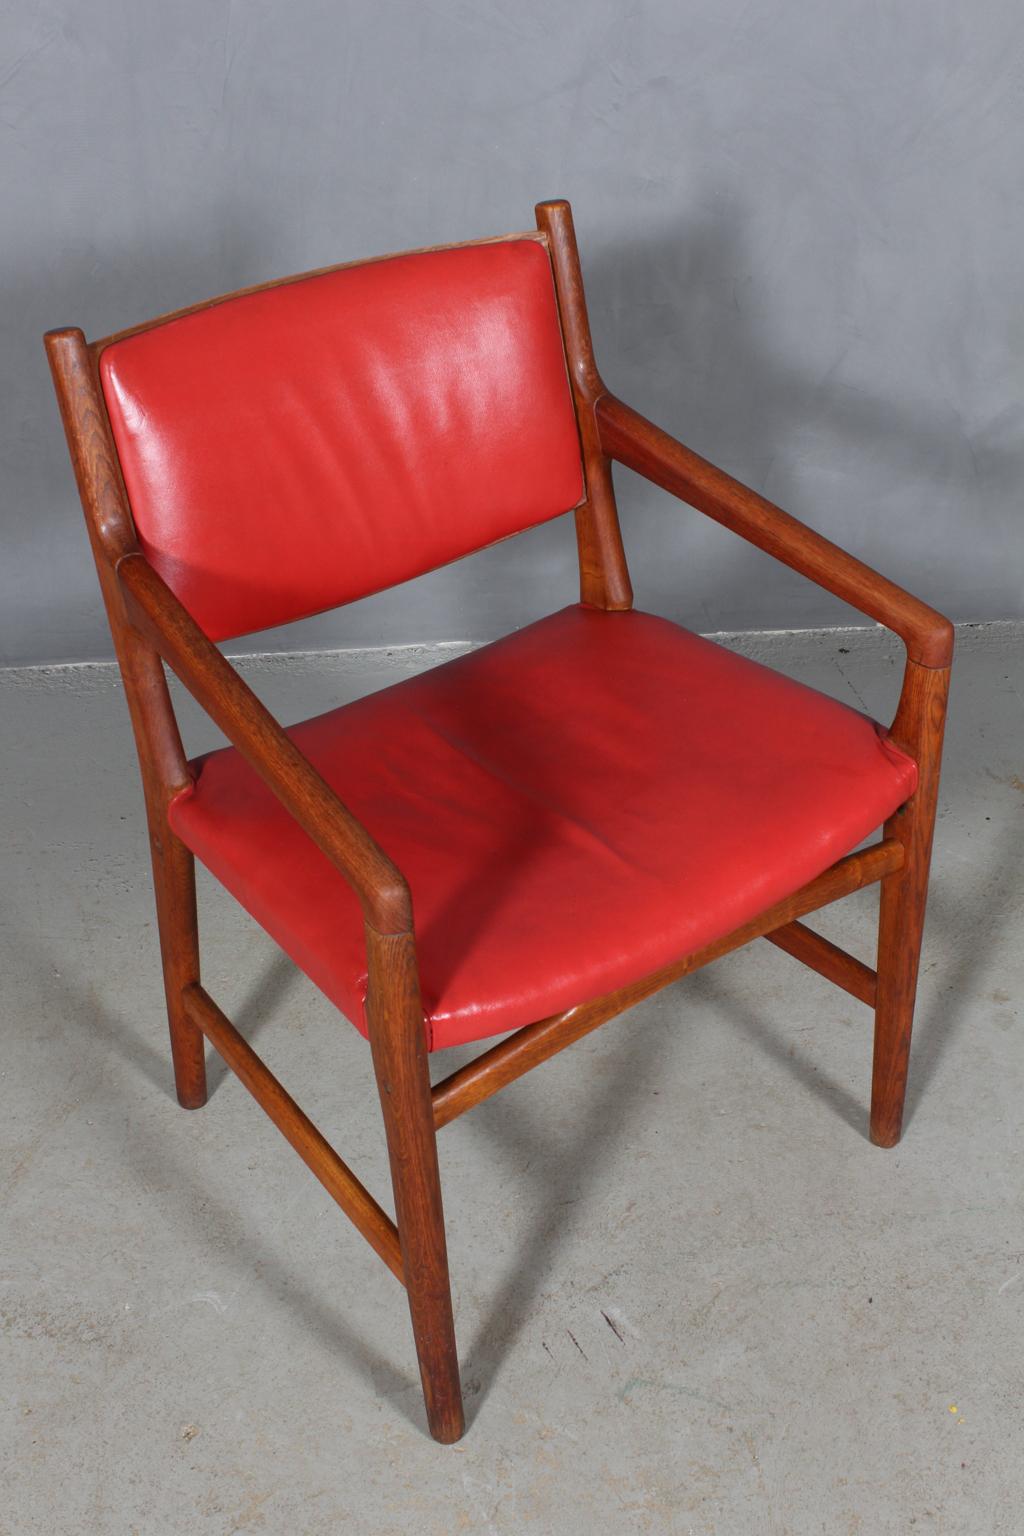 Hans J. Wegner armchair frame of oak and armrests of teak.

Seat and back original Upholstered with red patinated leather.

Made by Johannes Hansen in the 1950s for Magasin Du Nords shoe department. Therefore there are holes in the chair for